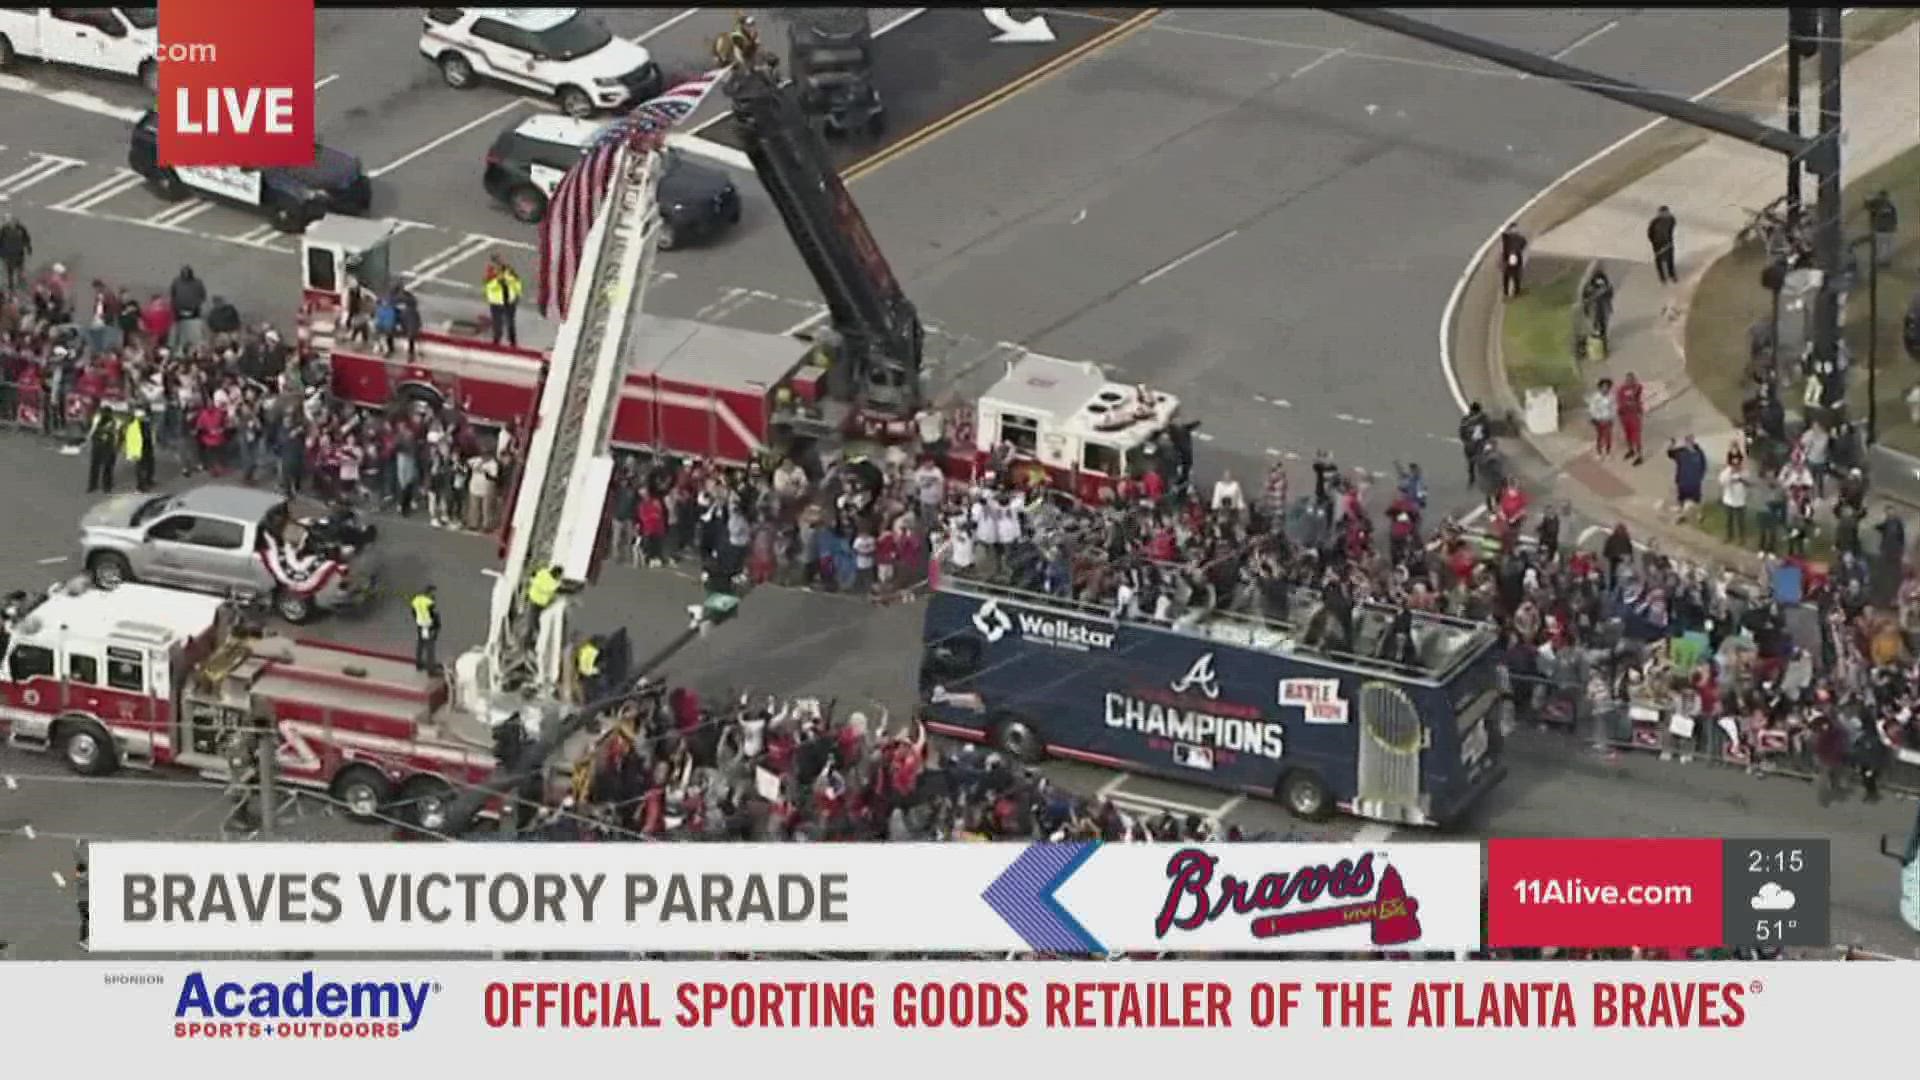 The Braves are headed to a concert at Truist Park to celebrate the World Series win.